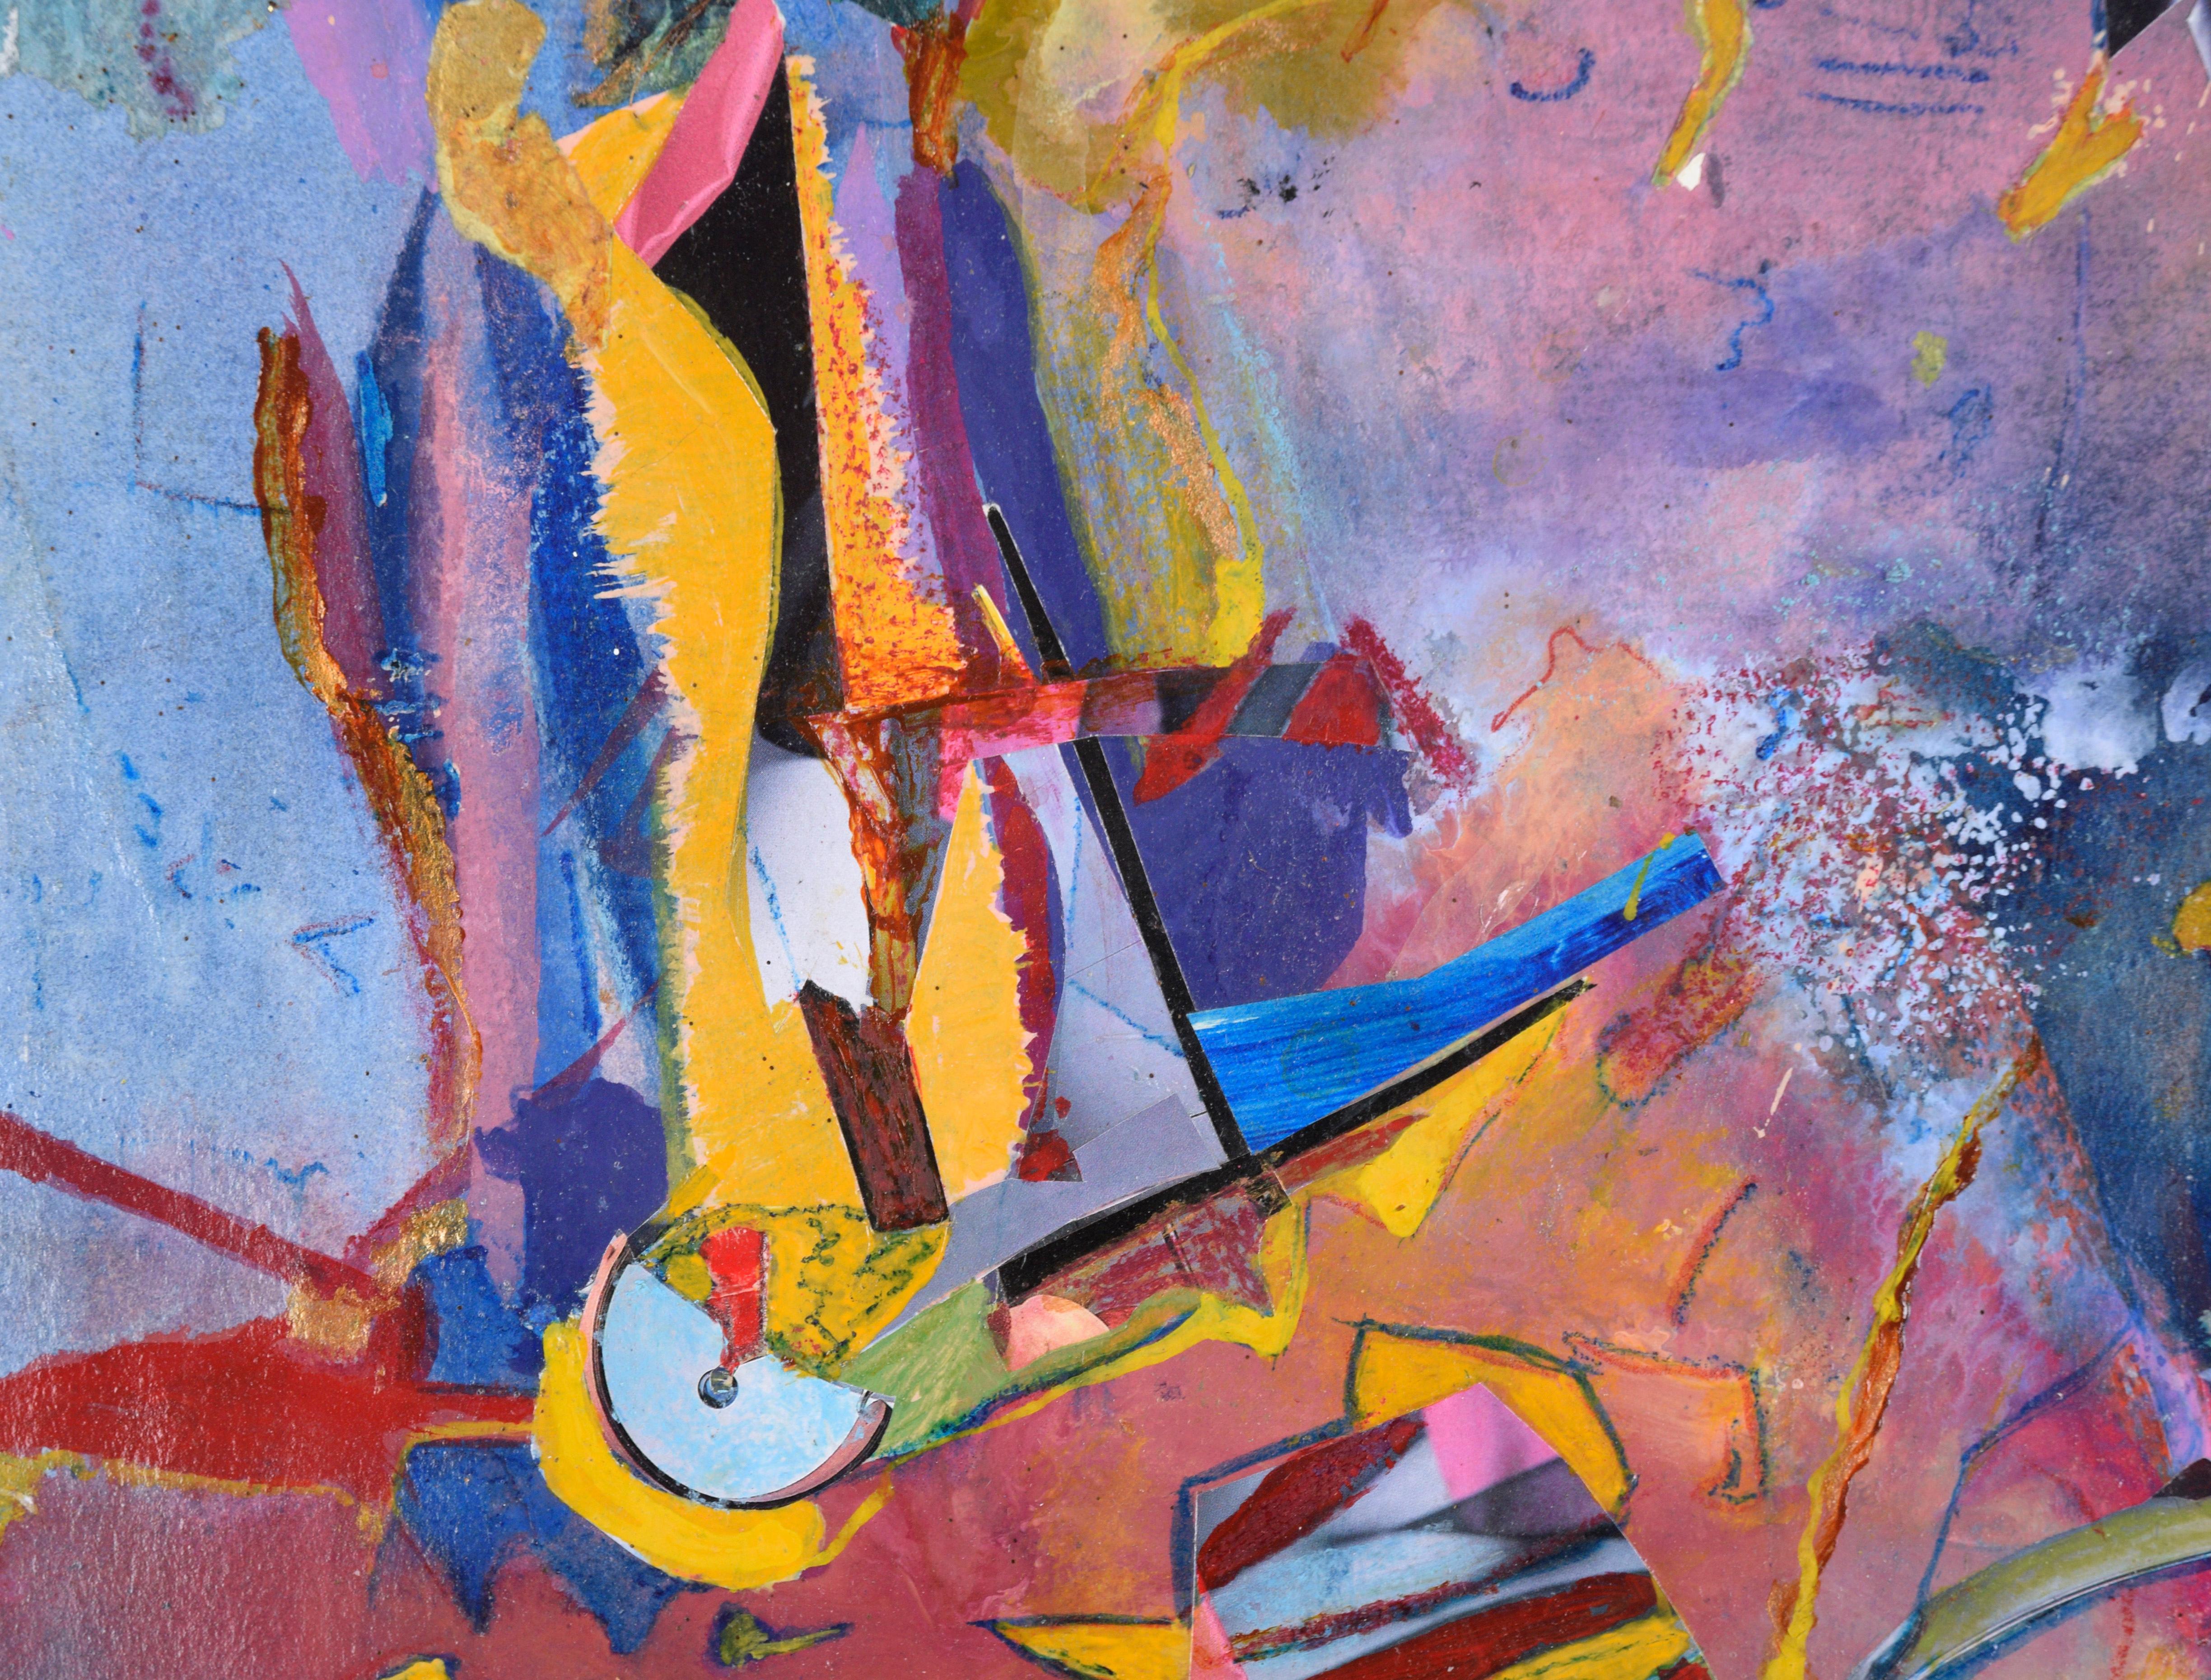 Carnival Abstract in Blue, Magenta, and Yellow - Oil and Collage on Paper

Bright and colorful abstract by Jennie T. Rafton (American, b. 1925). Shapes are scattered across the page, implying motion and movement. Cutouts have been layered with paint